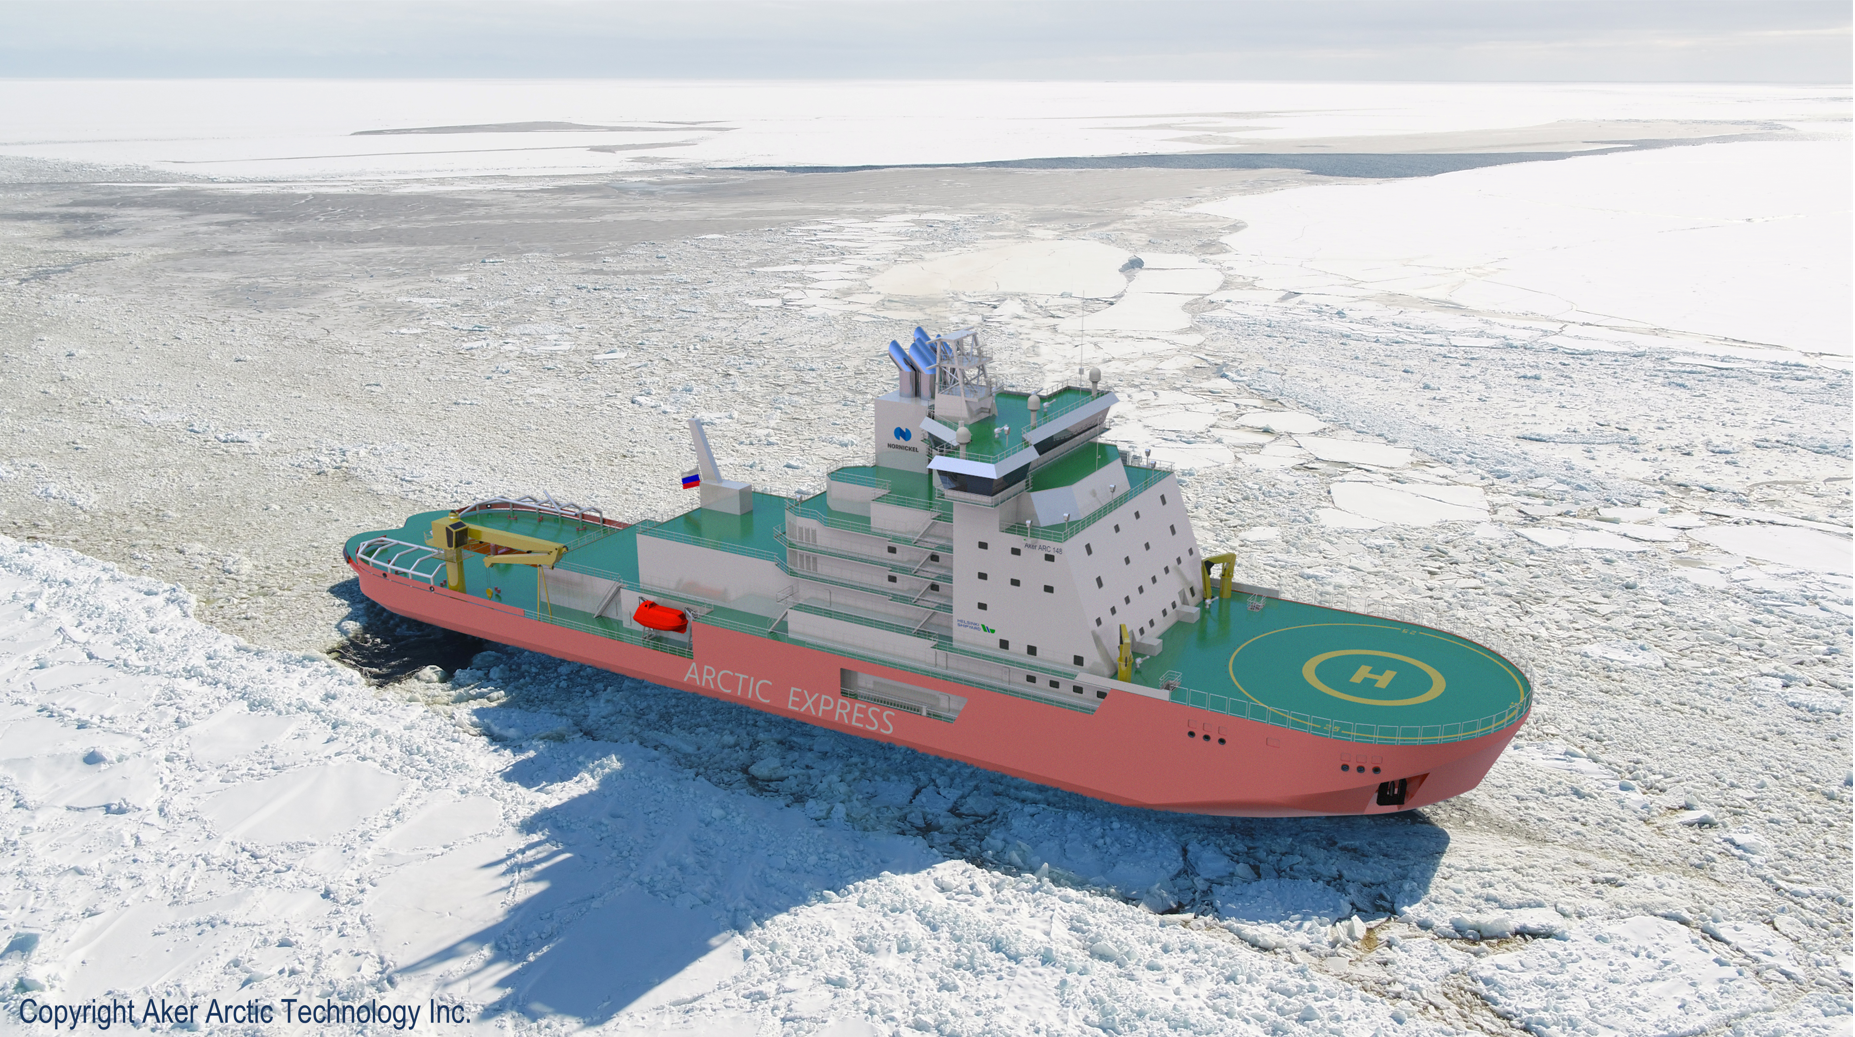 Helsinki Shipyard contracted the main equipment for machinery and  propulsion for the new icebreaker for Norilsk Nickel - Helsinki Shipyard